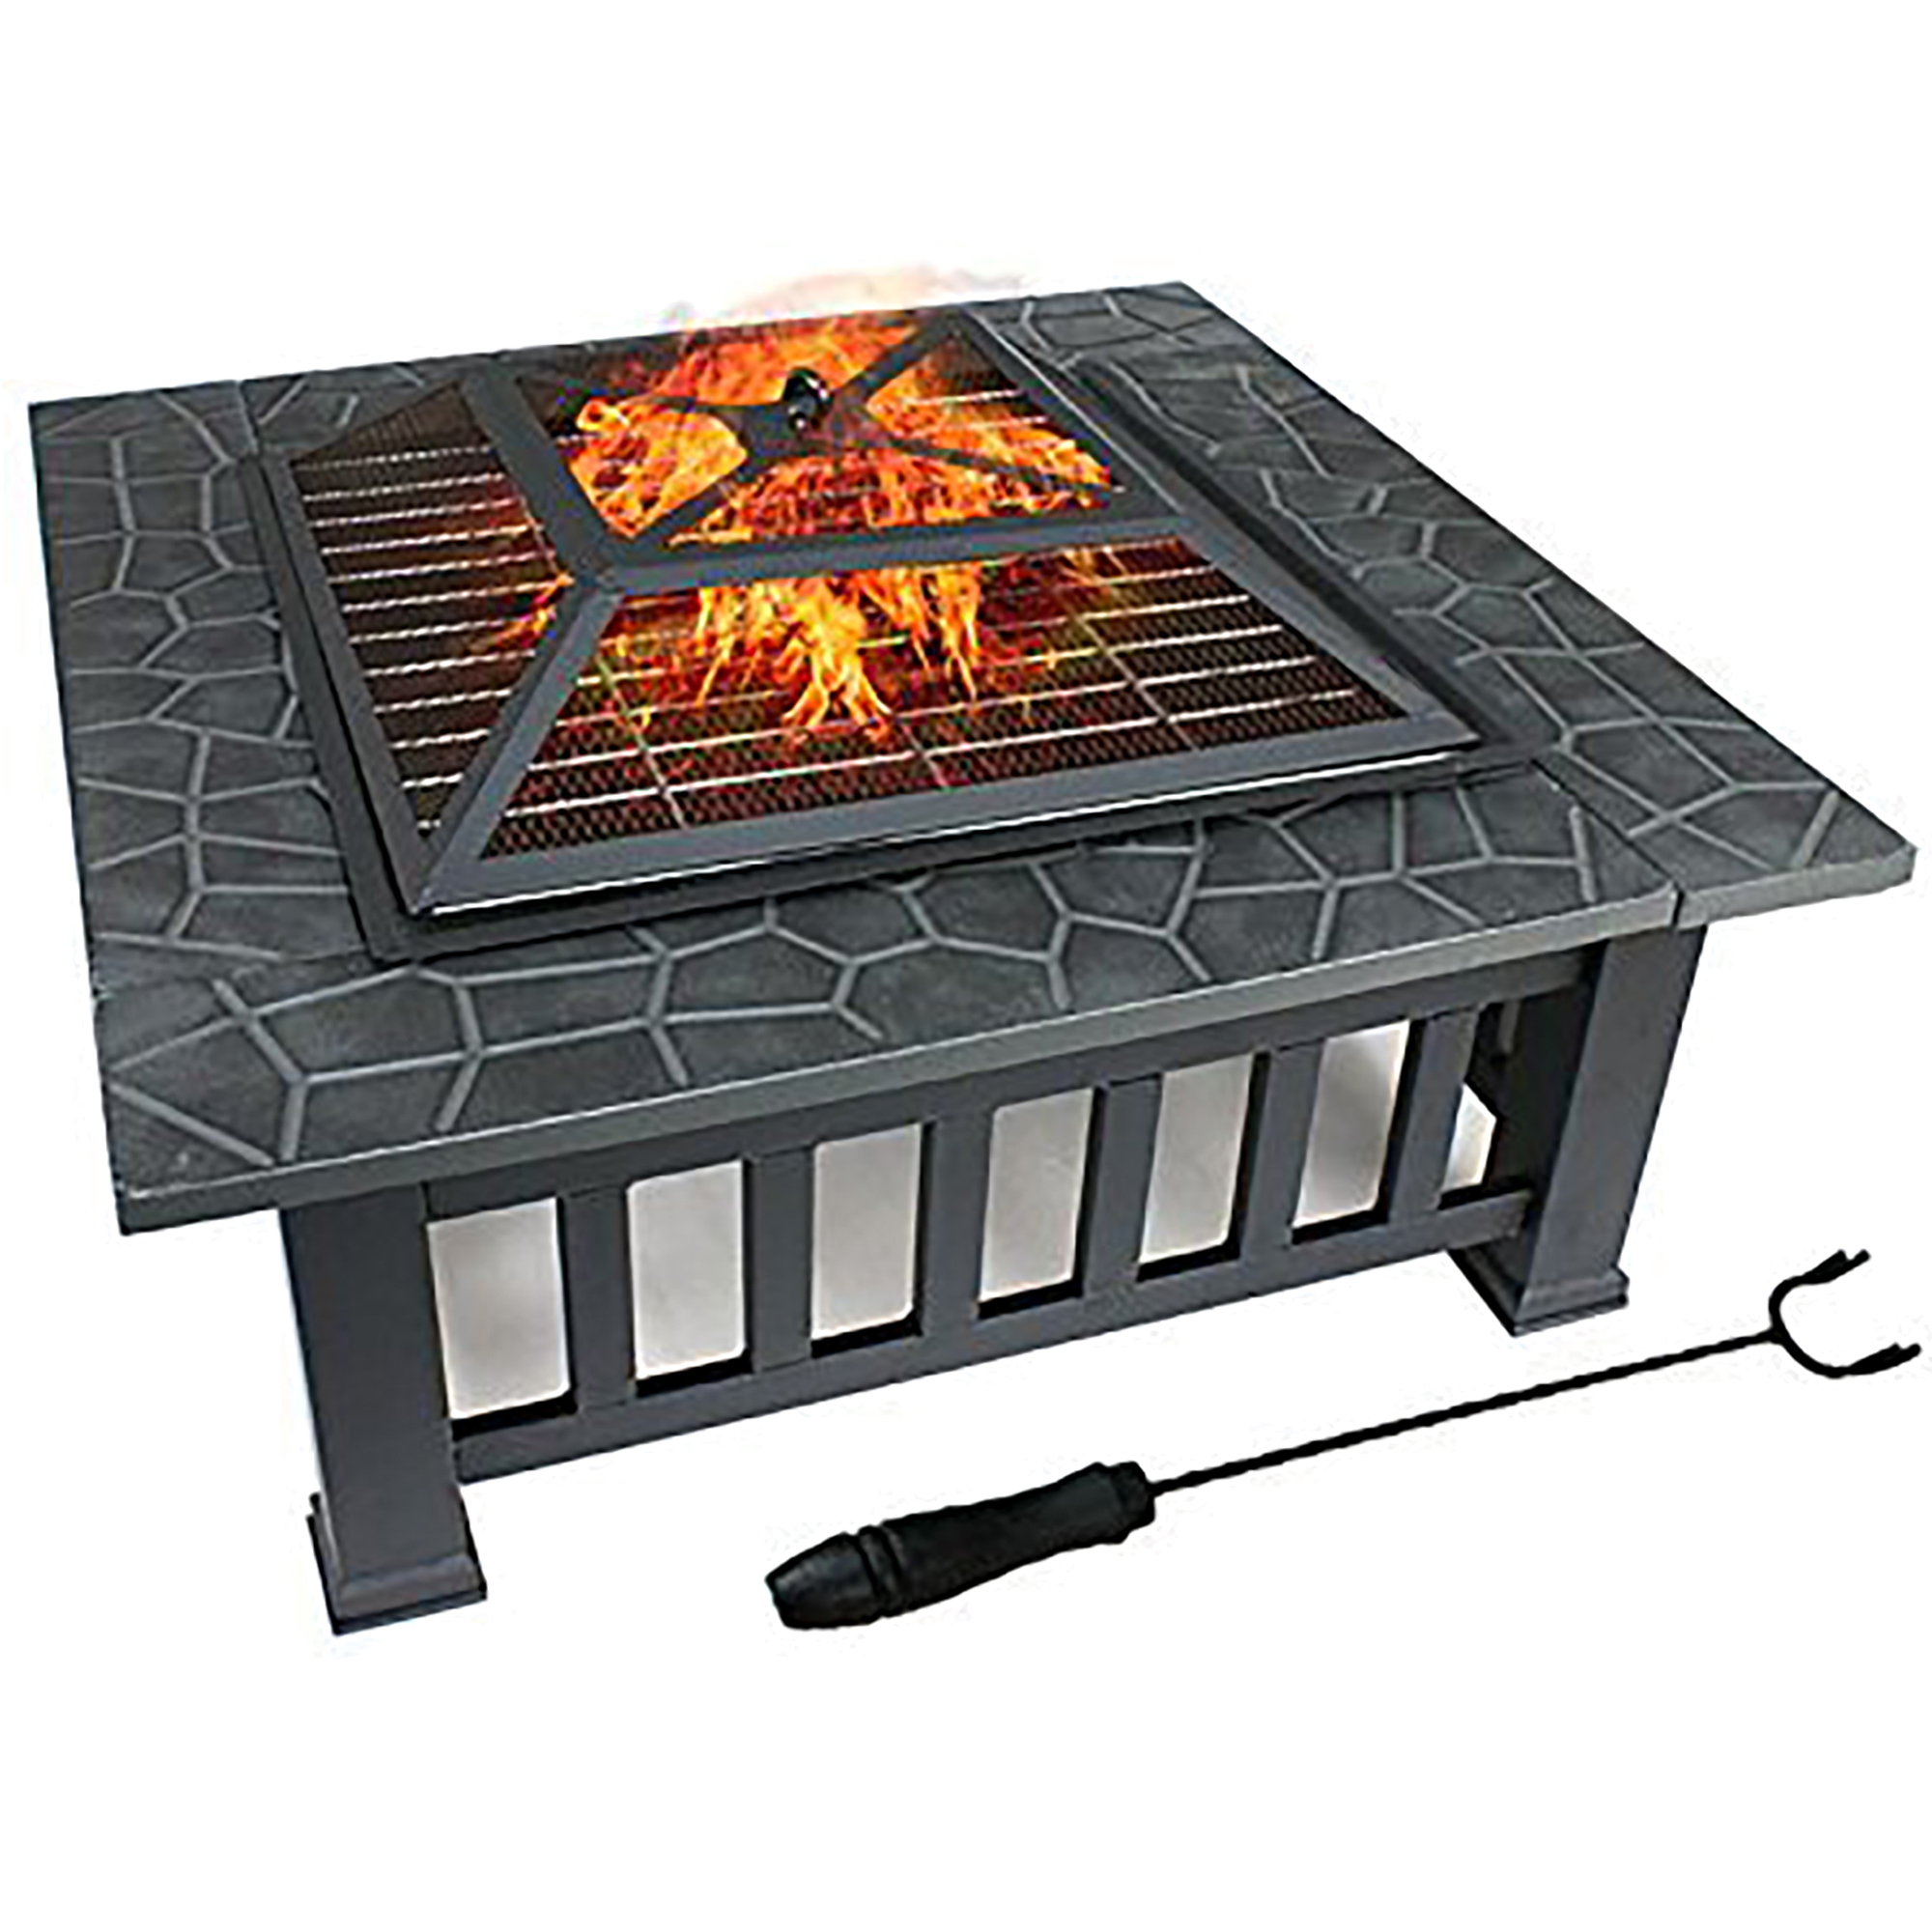 ZENY 32" Outdoor Fire Pit Square Metal Firepit Patio Garden Stove Wood Burning - image 1 of 12